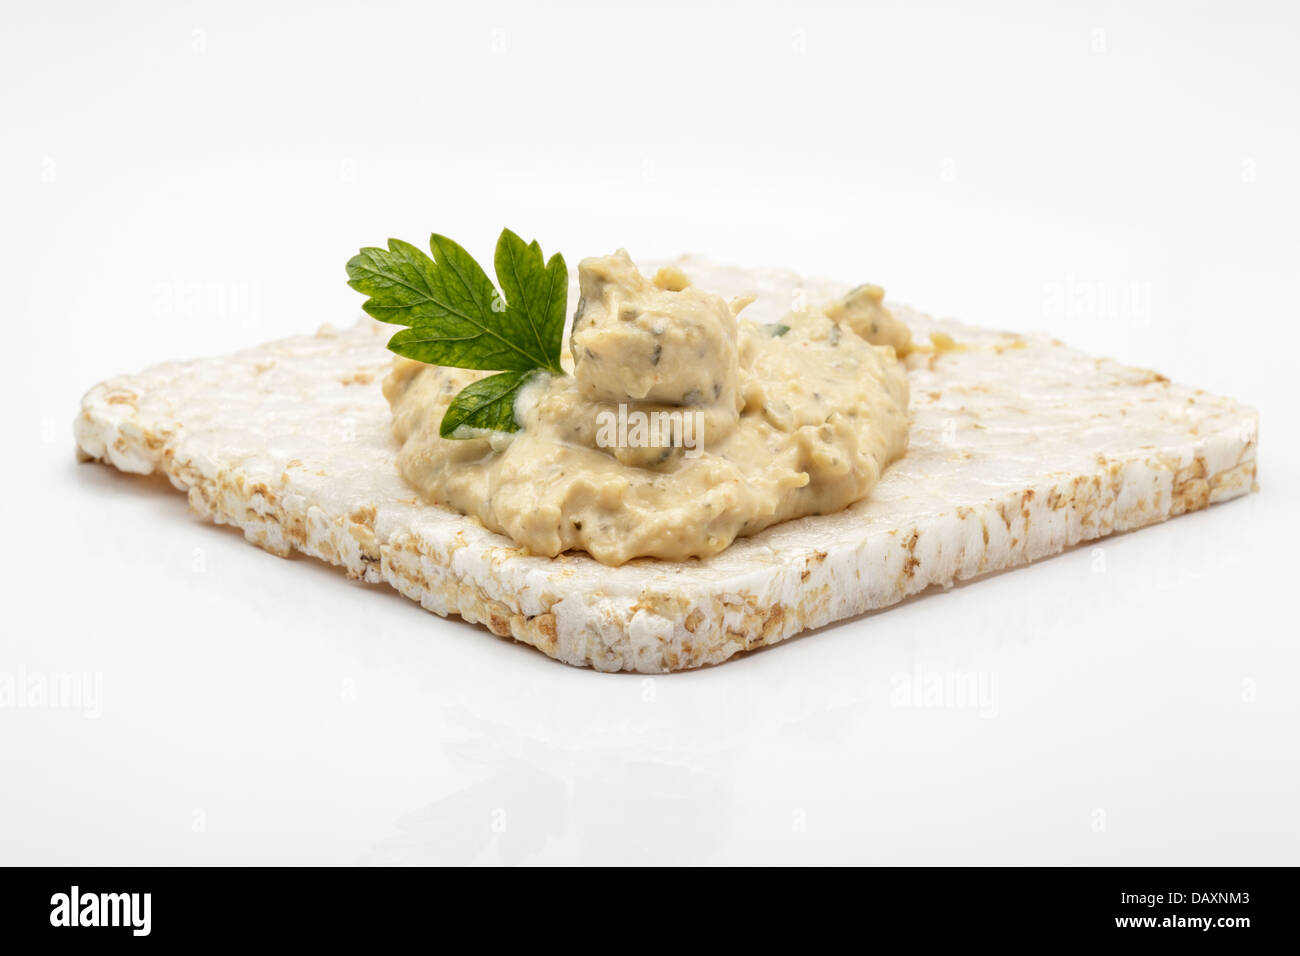 Square rice cakes topped with houmous Stock Photo